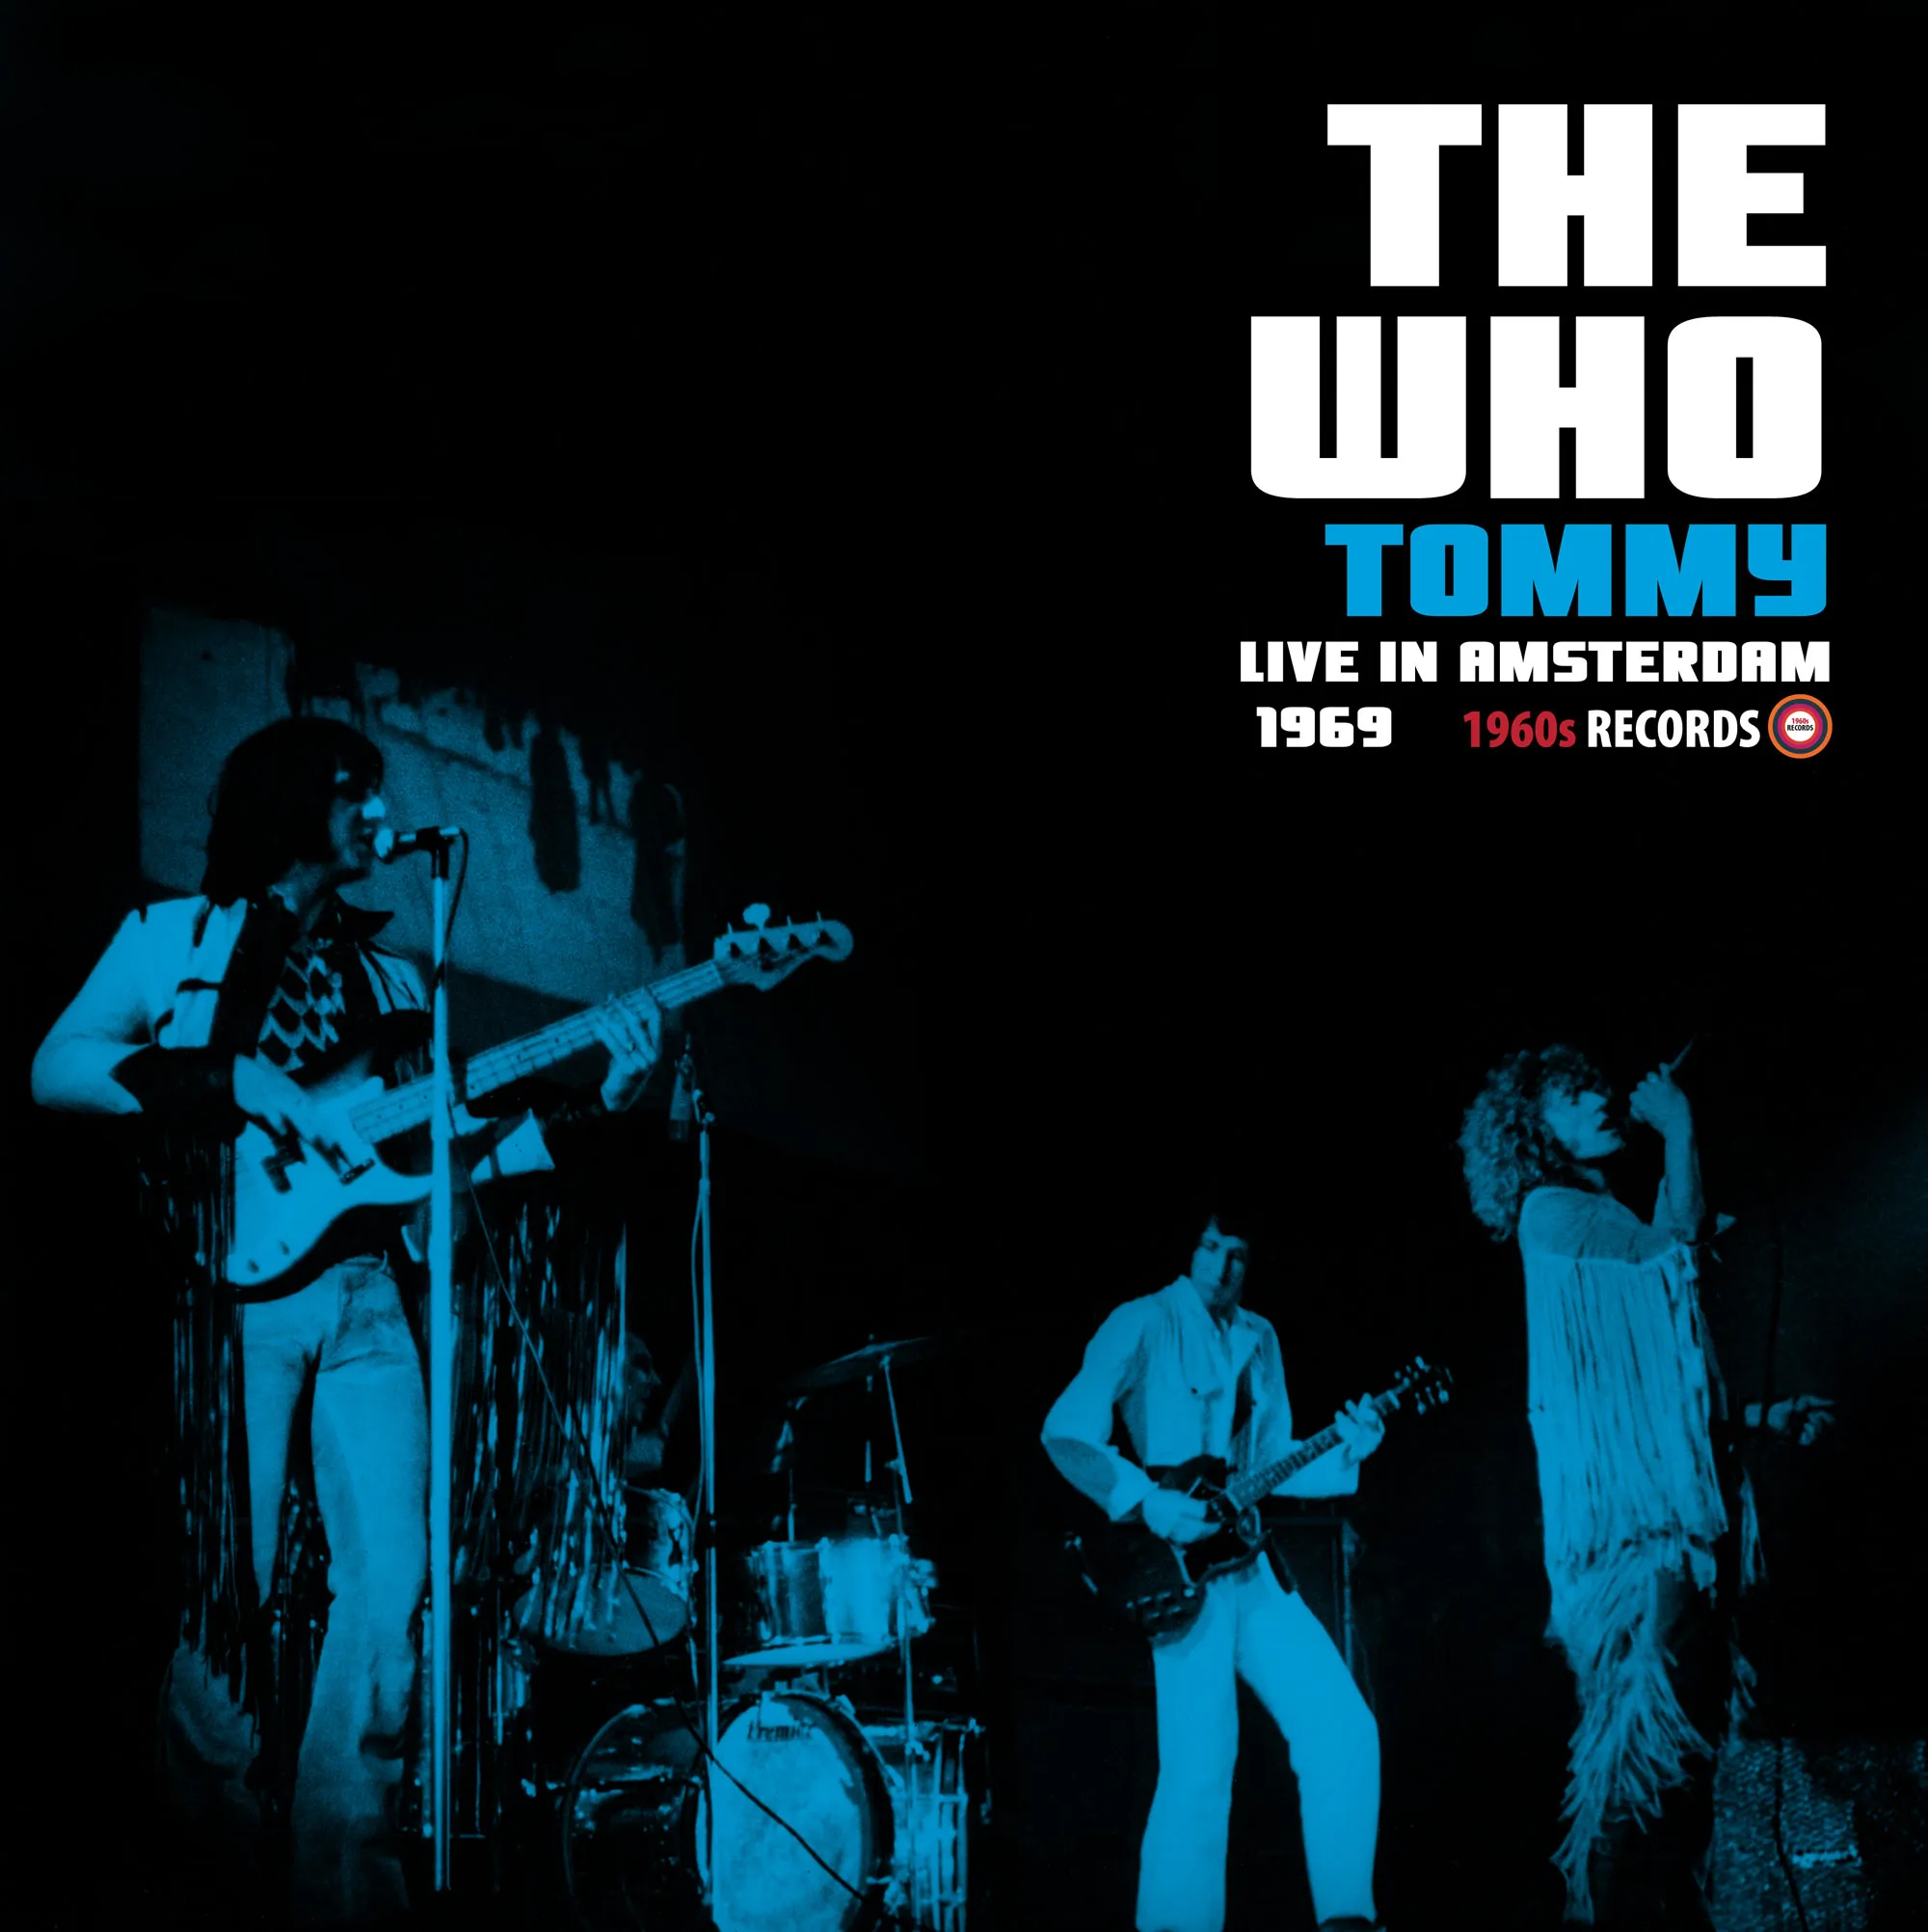 <strong>The Who - Tommy Live In Amsterdam 1969</strong> (Vinyl LP)